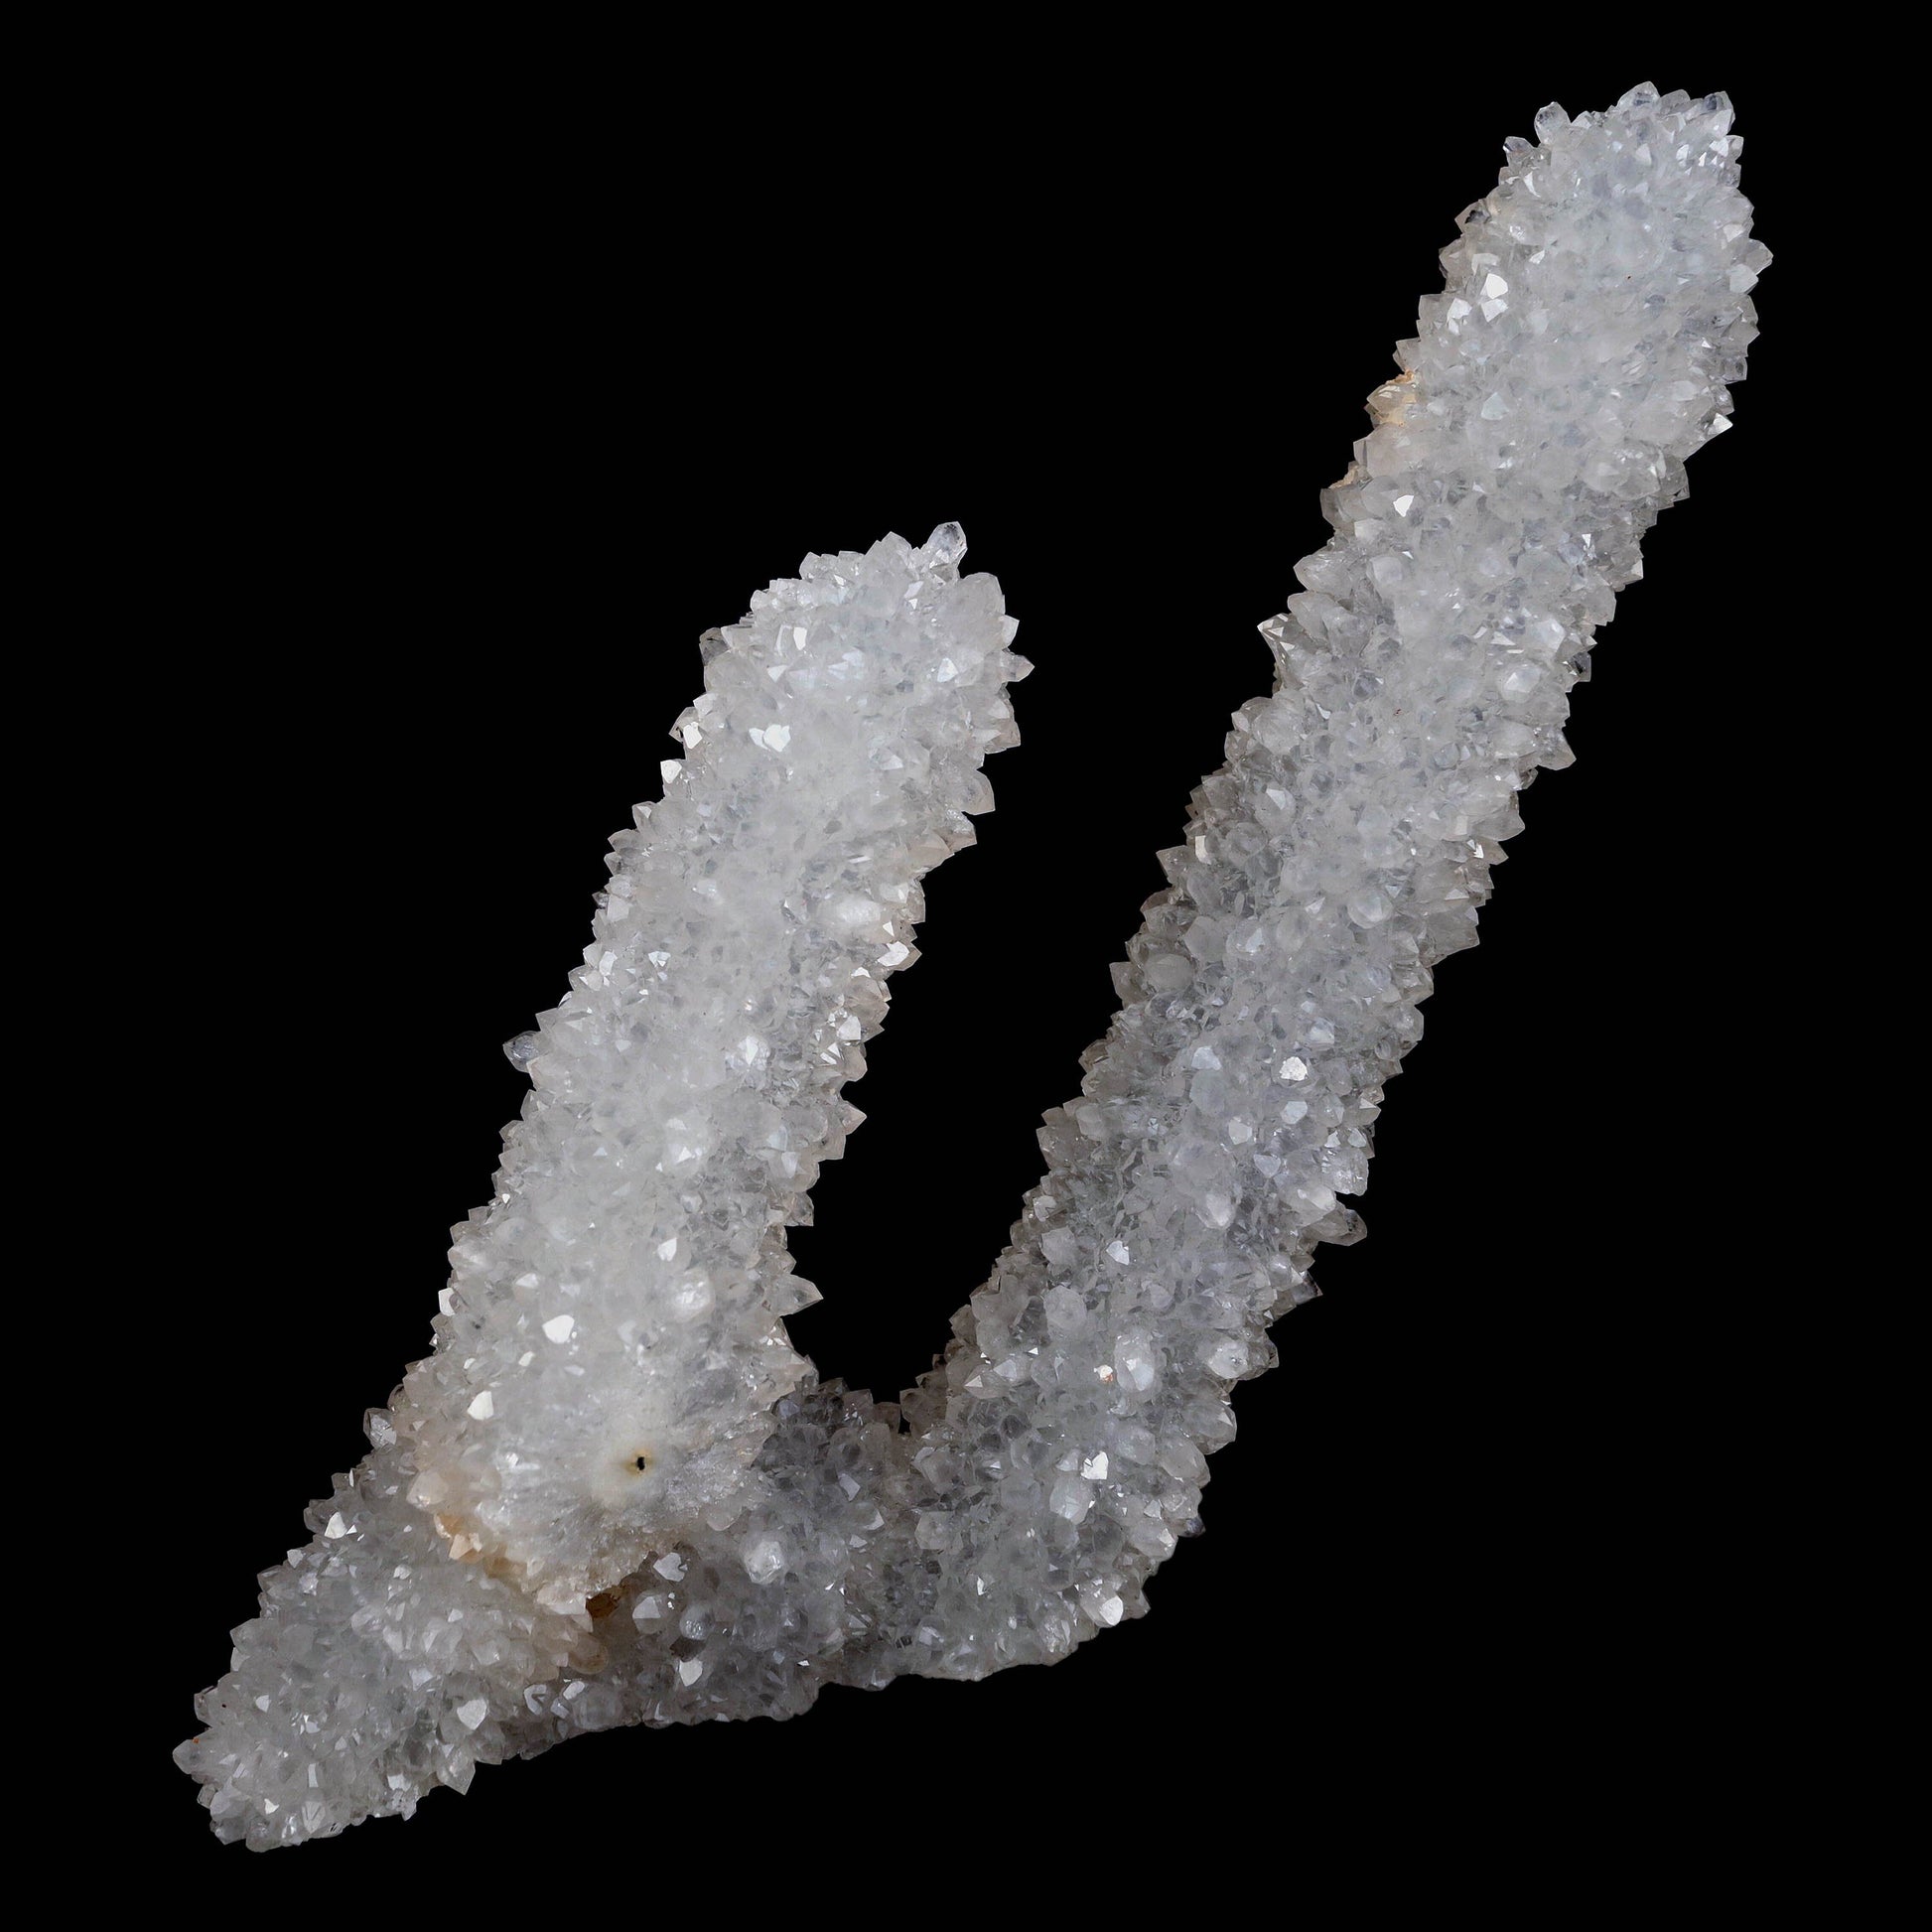 MM Quartz Sparkling Twin Stalactites Geode Natural Mineral Specimen #…  https://www.superbminerals.us/products/mm-quartz-sparkling-twin-stalactites-geode-natural-mineral-specimen-b-4623  Features: A very aesthetic specimen of transparent clear&nbsp; Quartz crystals completely covering all sides of a high stalactites as well as two smaller adjoining stalactites, making for great symmetry. A beautiful showy piece in excellent condition.Primary Mineral(s): MM Quartz